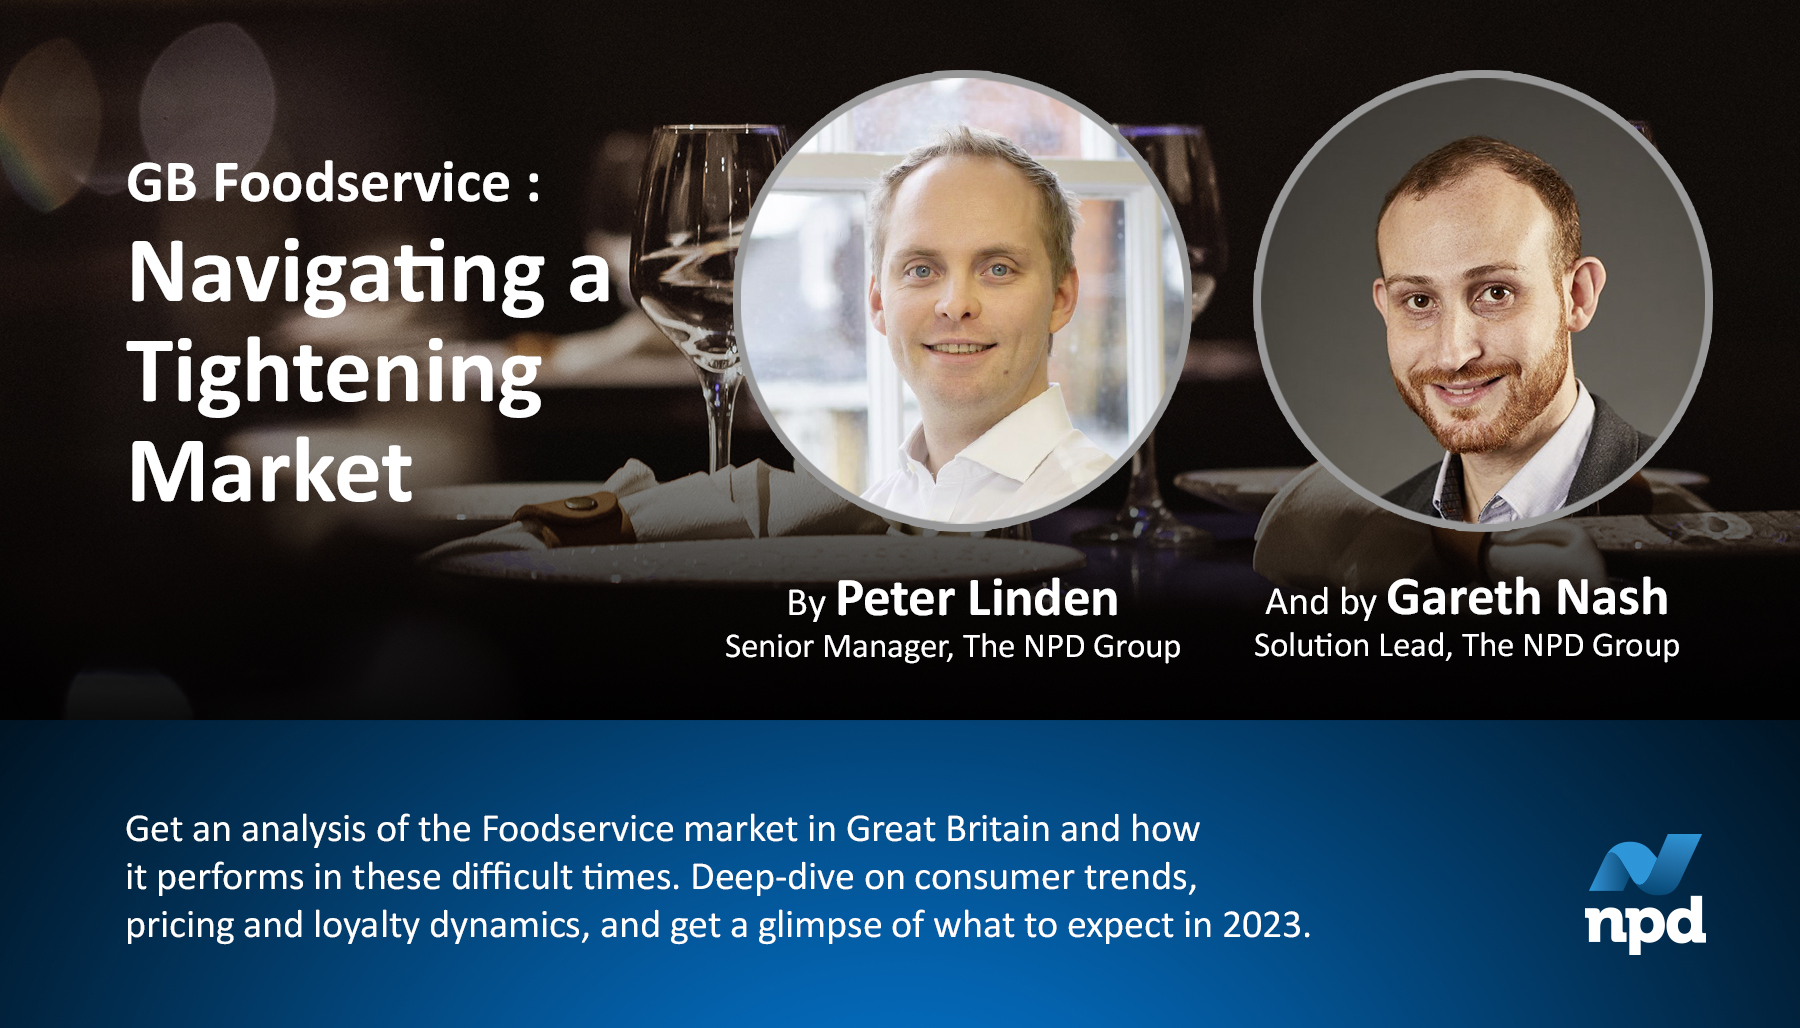 GB Food Service: Navigating a Tightening Market, by Peter Linden, Senior Manager, The NPD Group and by Gareth Nash, Solution Lead, The NPD Group. Get an analysis of the Foodservive market in Great Britain and how it performs in these difficult times. Deep-dive on consumer trends, pricing and loyalty dynamics, and get a glimpse of what to expect in 2023.